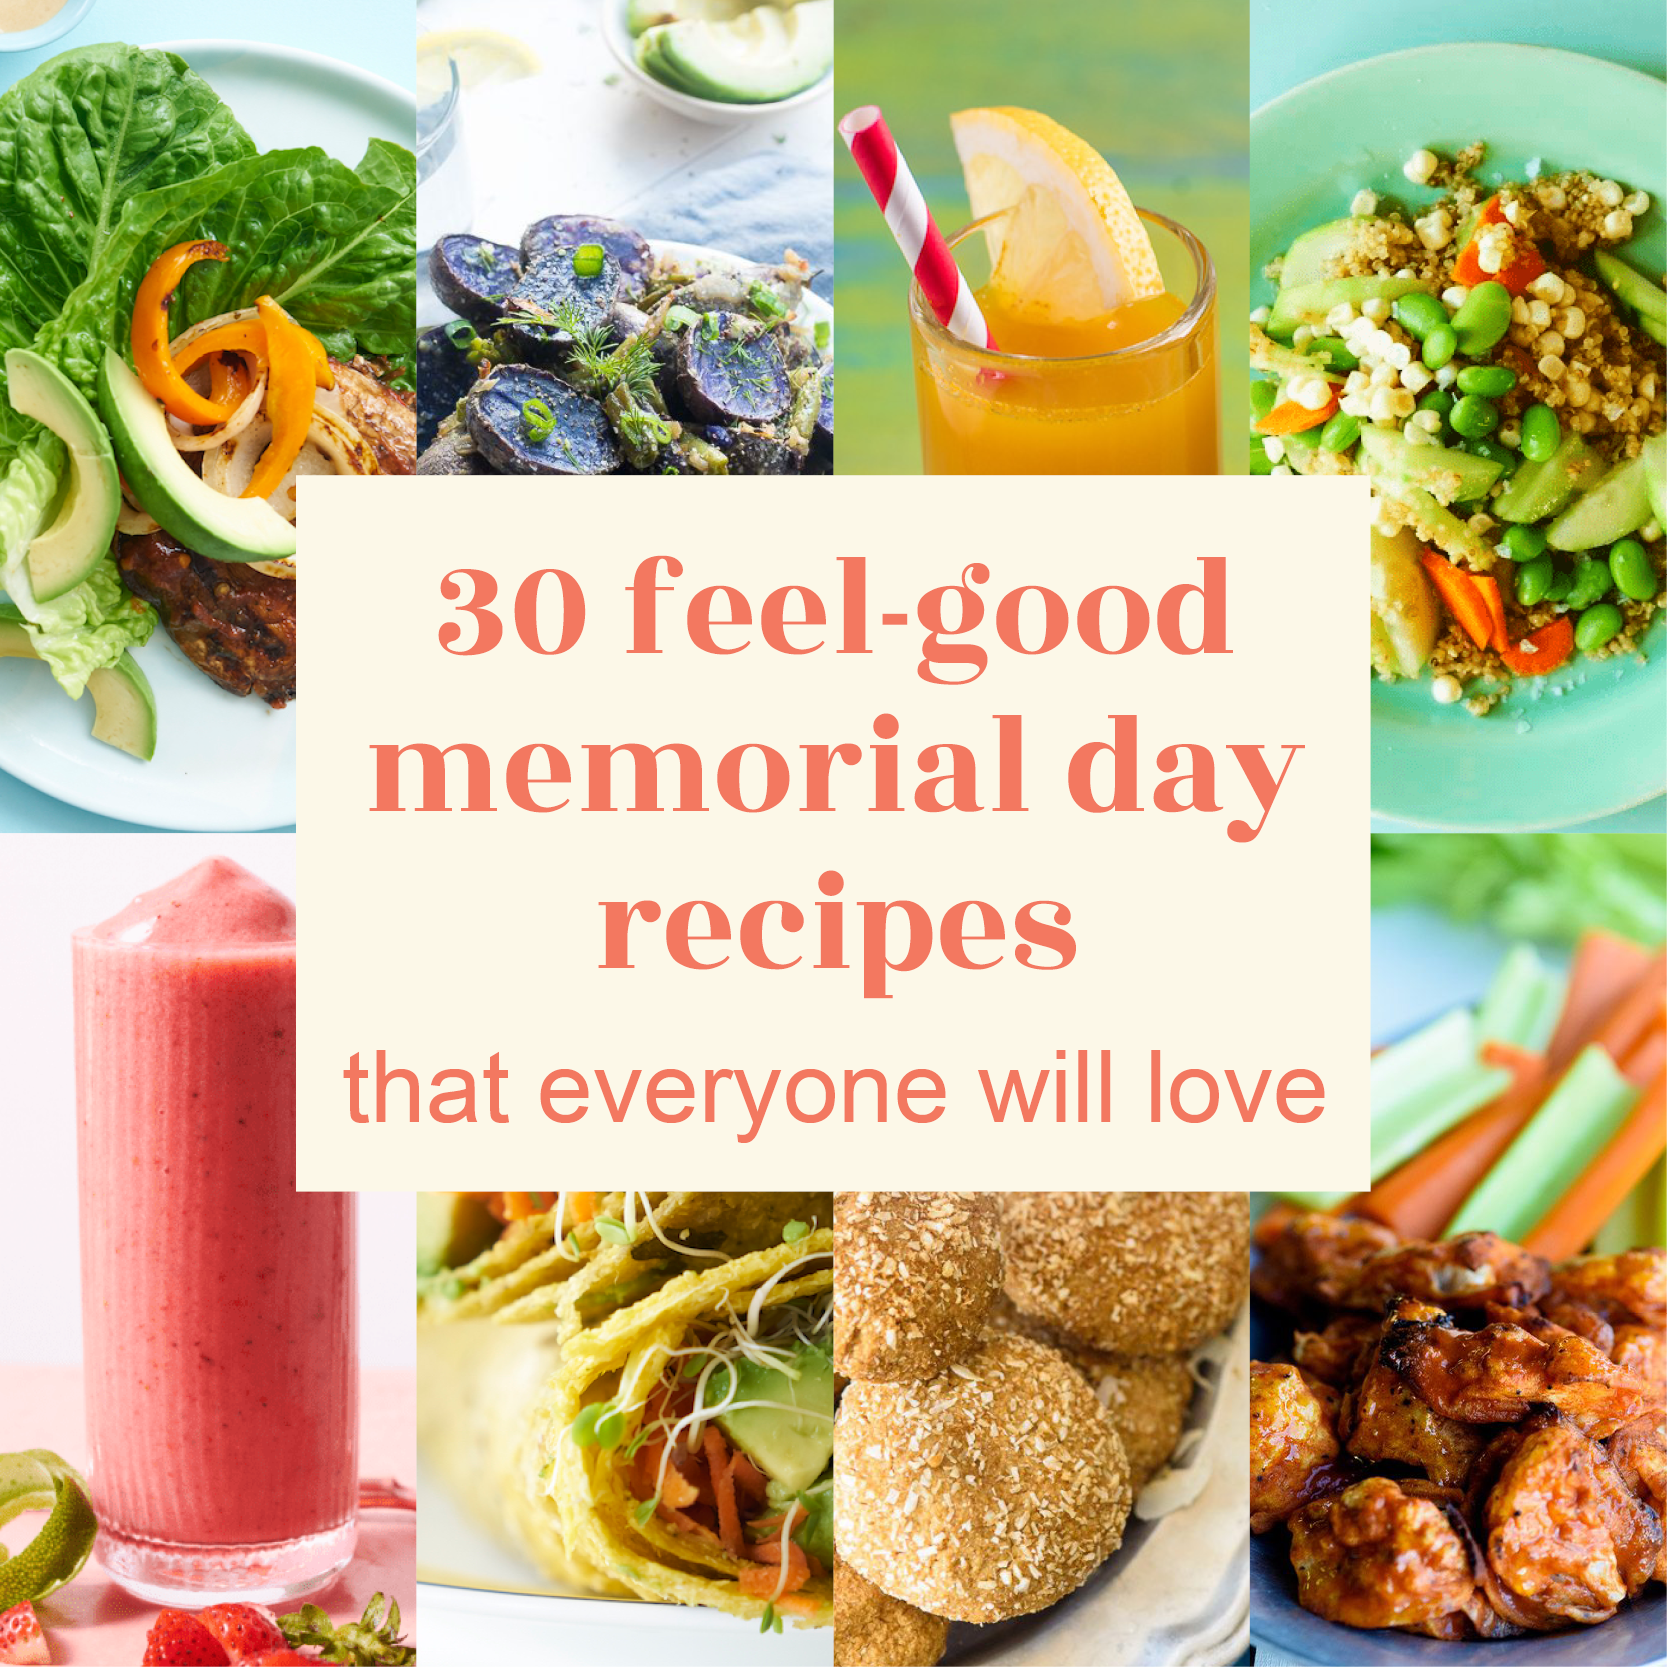 30 Feel-Good Memorial Day Recipes That Everyone Will Love!